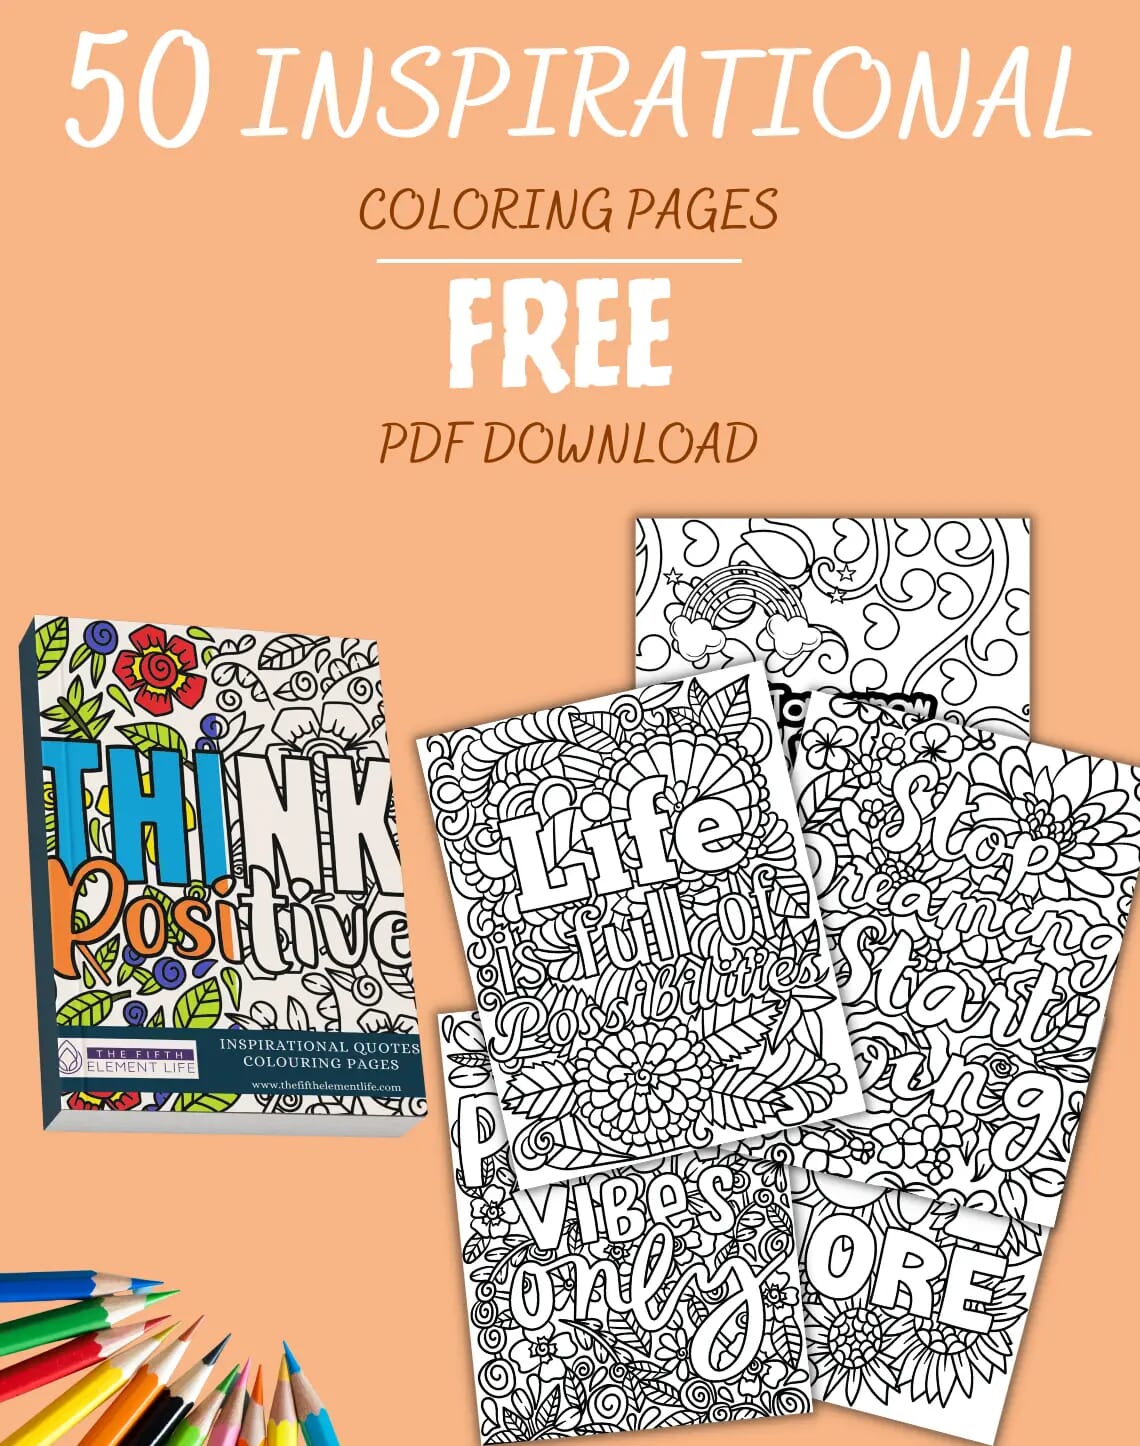 How Inspirational Coloring Books Can Change Your Life